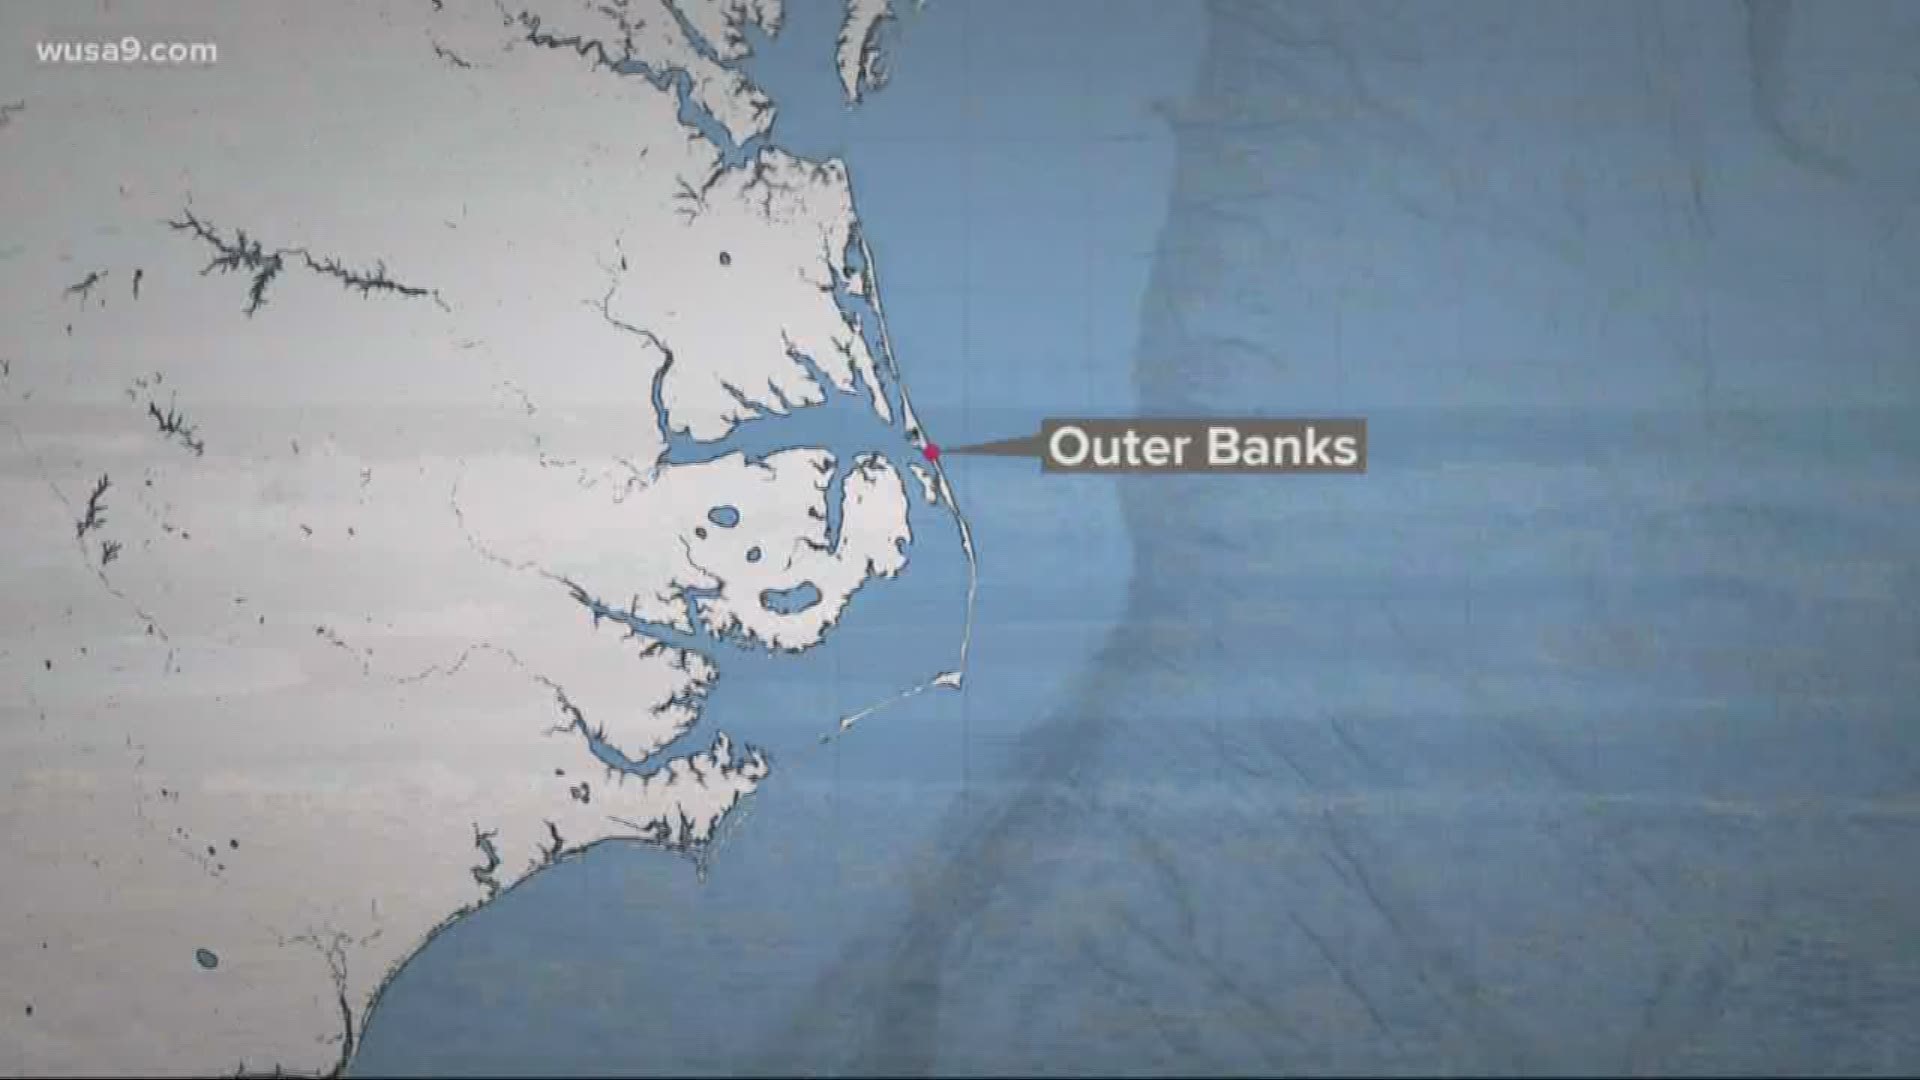 Whether you're in Virginia, DC, or Maryland, you probably know about the Outer Banks in North Carolina. A HUGE vacation spot. People there are packing their bags and heading inland. John Henry takes a deeper look at why it's prone to flooding.